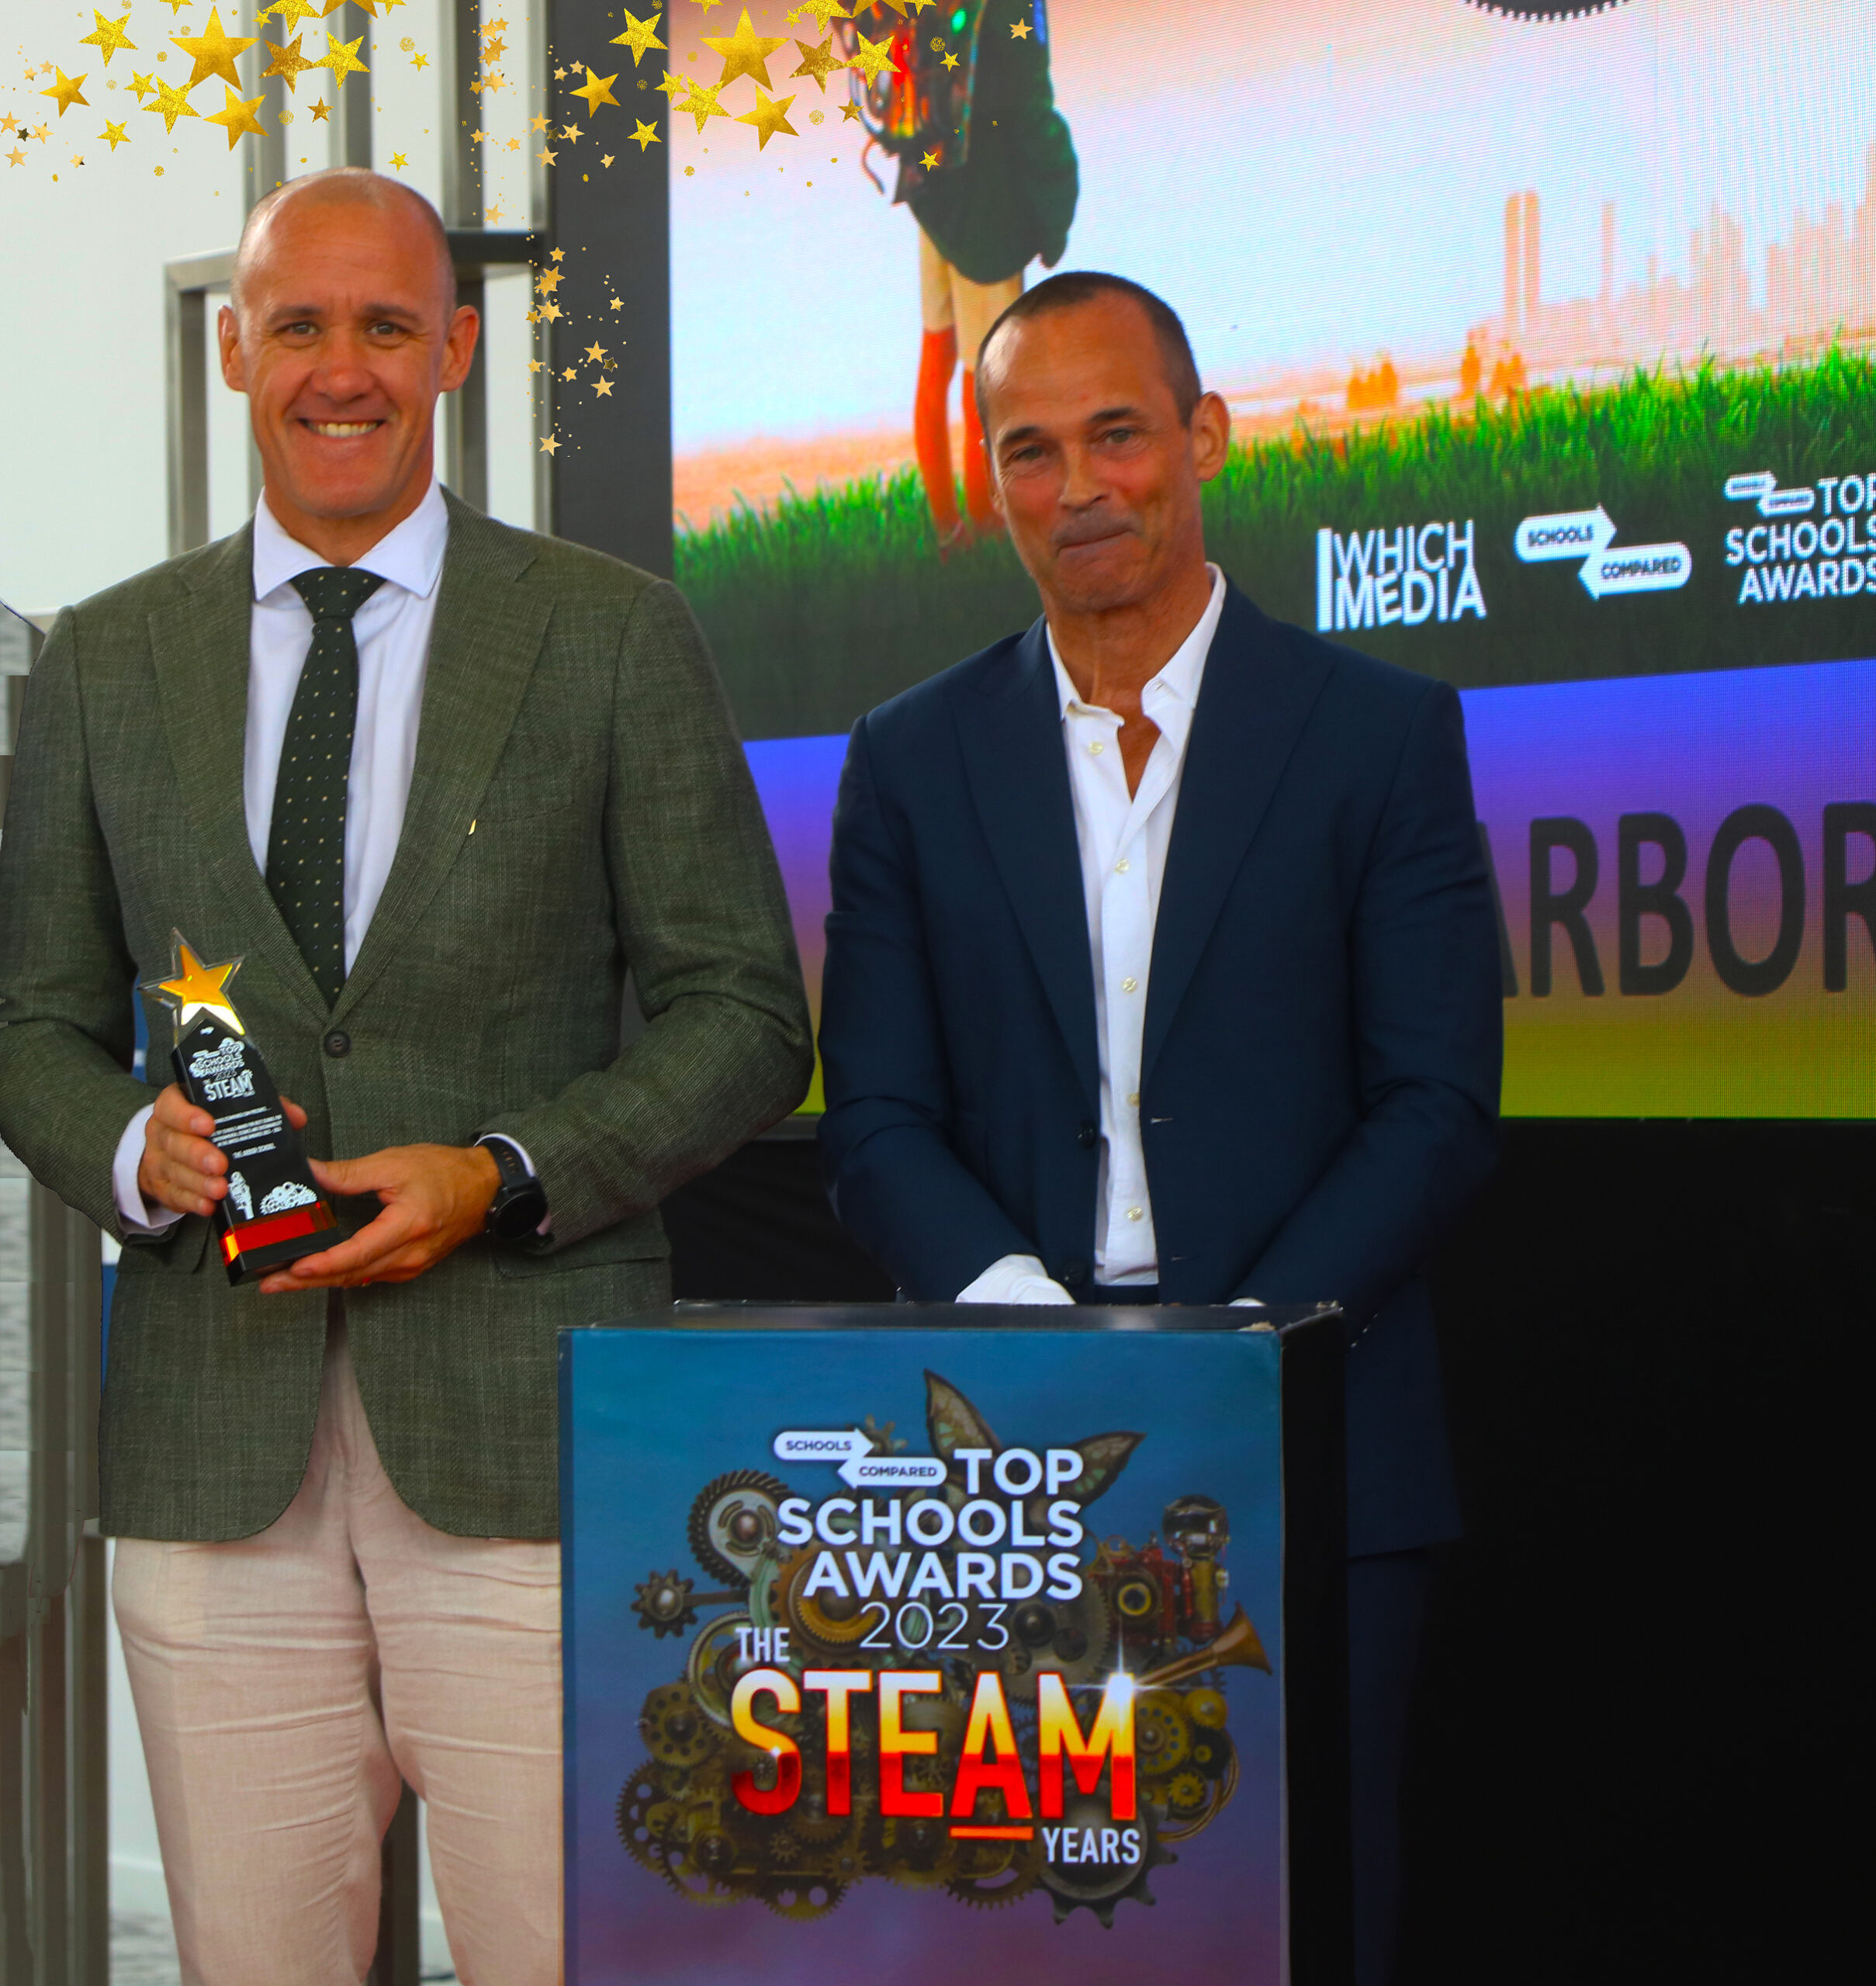 Brett Girven, Principal, The Arbor School Dubai receiving The Top Schools Award for Best School for Sustainability, Environmental Science and Eco Literacy from David Westley, Co-Founder, The Top Schools Awards